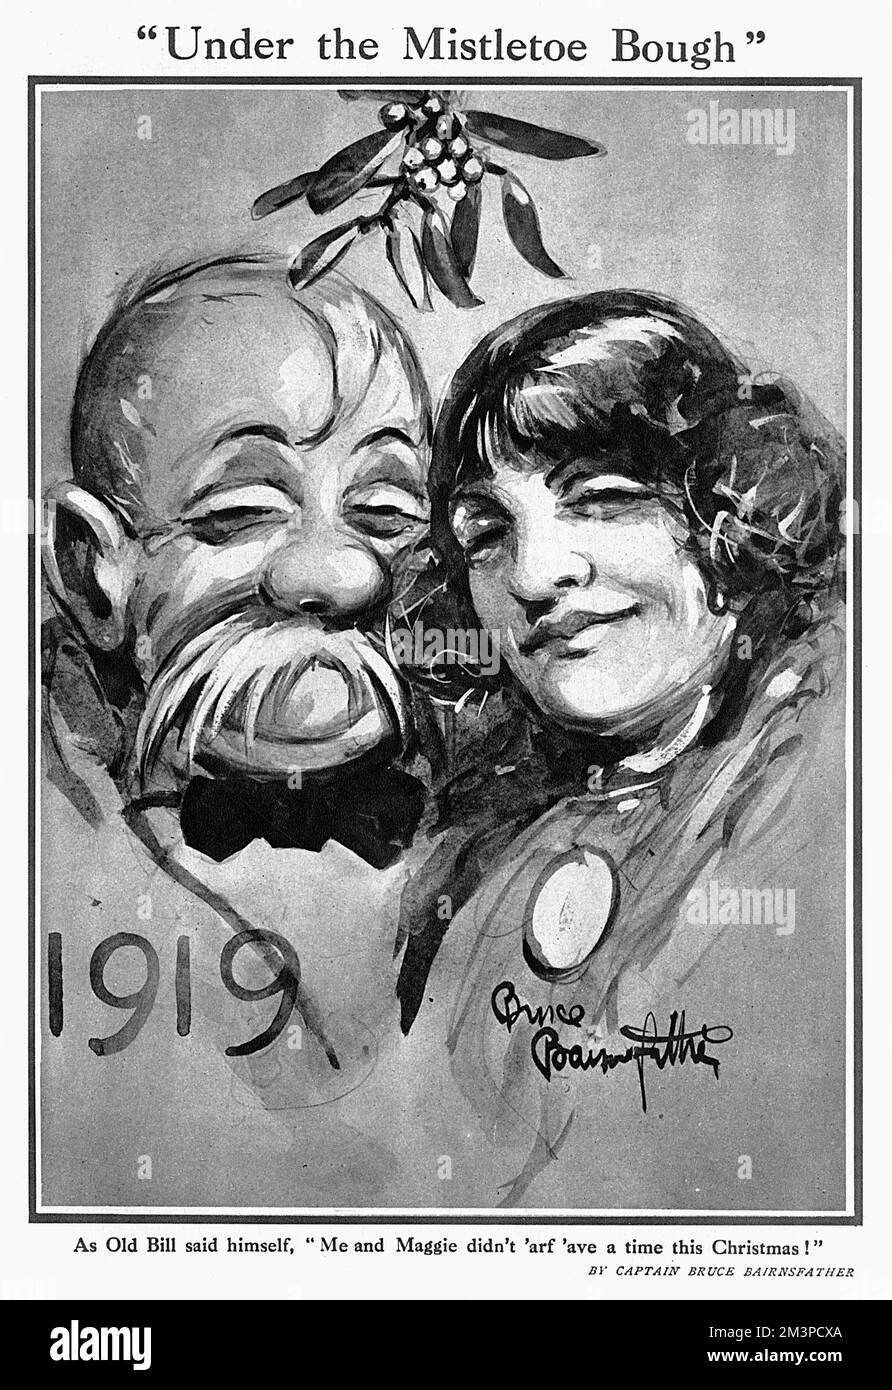 As Old Bill said to himself, &quot;Me and Maggie didn't 'arf 'ave a time this Christmas.&quot;  Old Bill, the soldier character created by Captain Bruce Bairnsfather in The Bystander is pictured in the 31 December 1919 issue of the magazine beaming along with his wife Maggie, having enjoyed Christmas free of the cares of war and demobilisation.       Date: 1919 Stock Photo